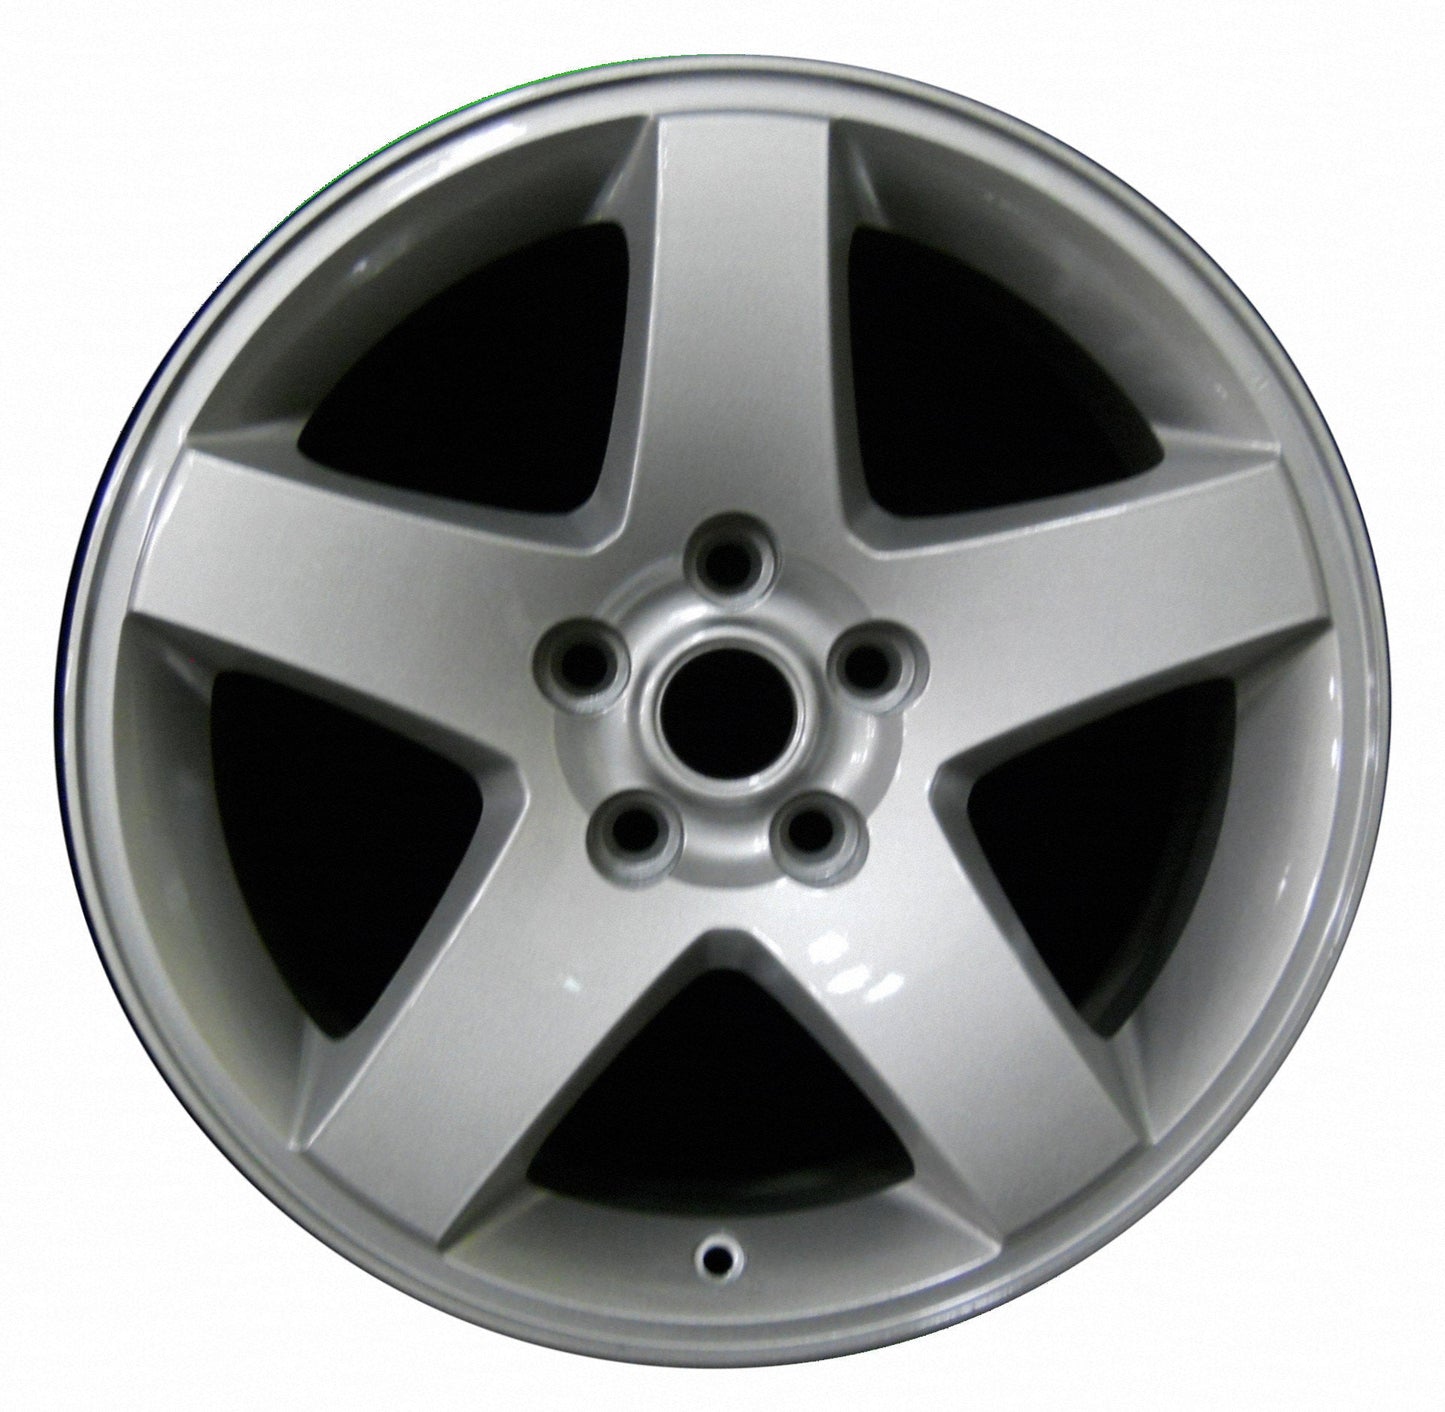 Dodge Charger  2008, 2009, 2010 Factory OEM Car Wheel Size 17x7 Alloy WAO.2325.PS02.FF